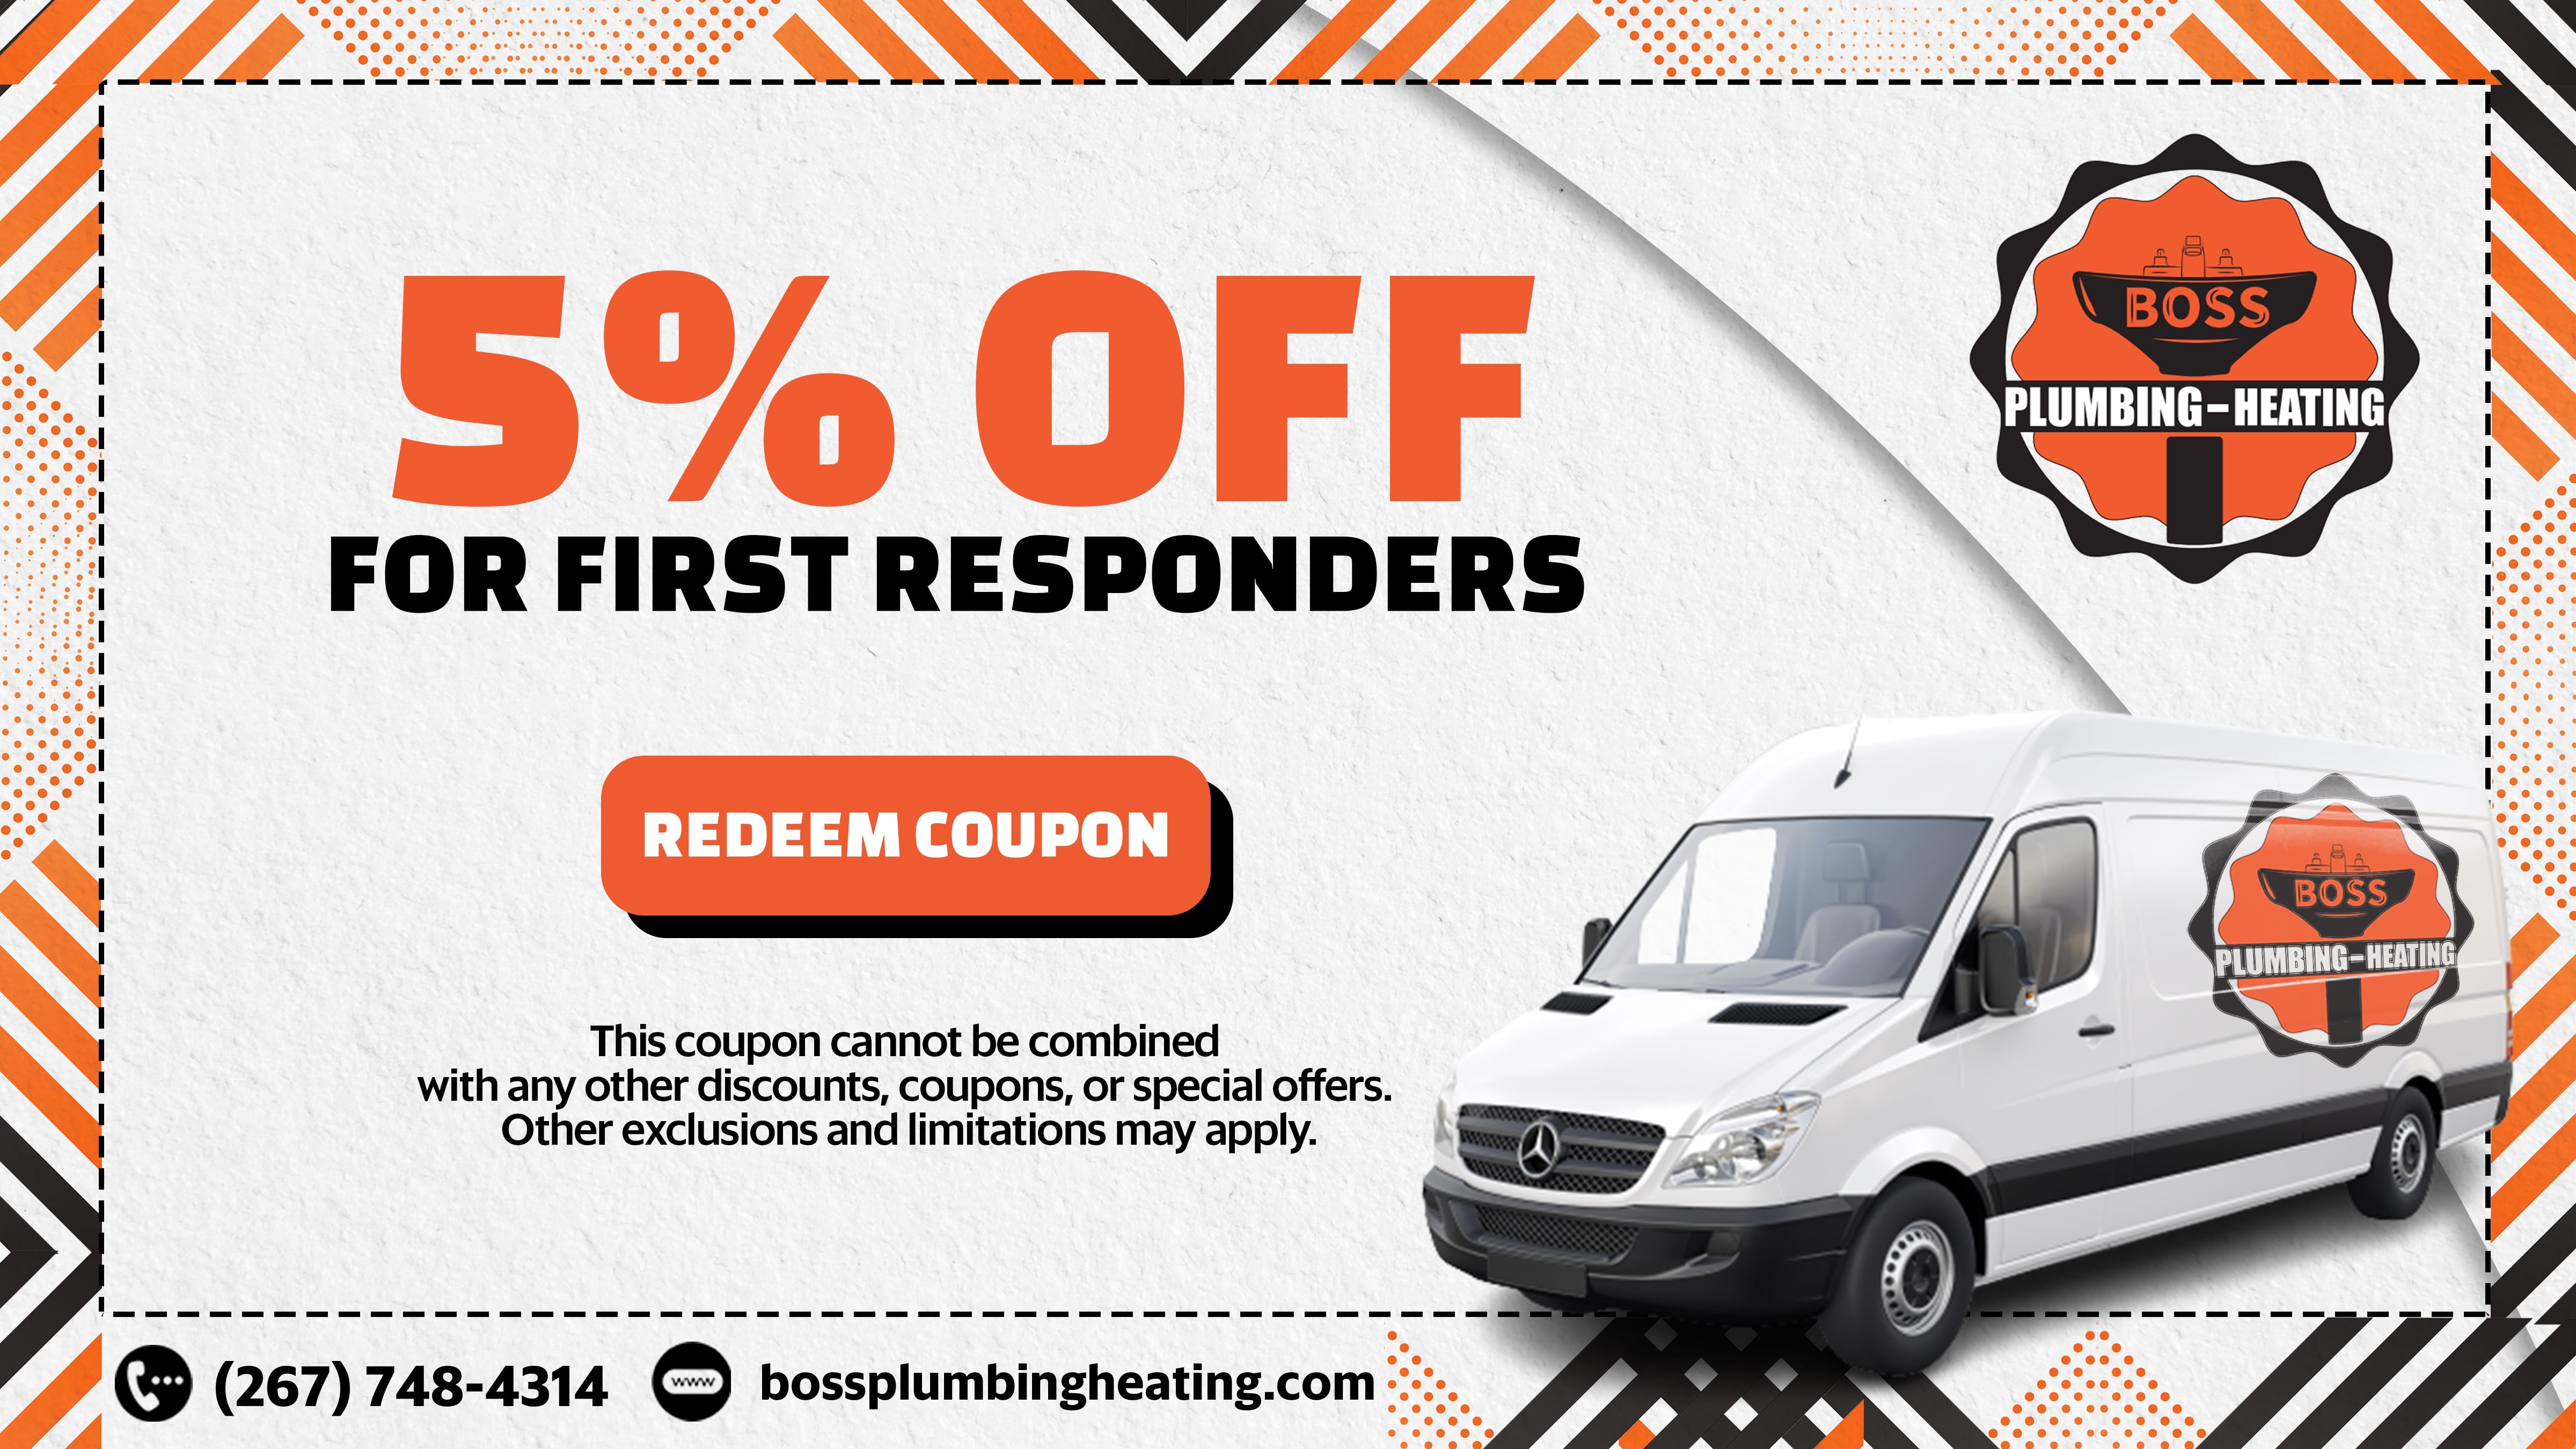 5% OFF FOR FIRST RESPONDERS 